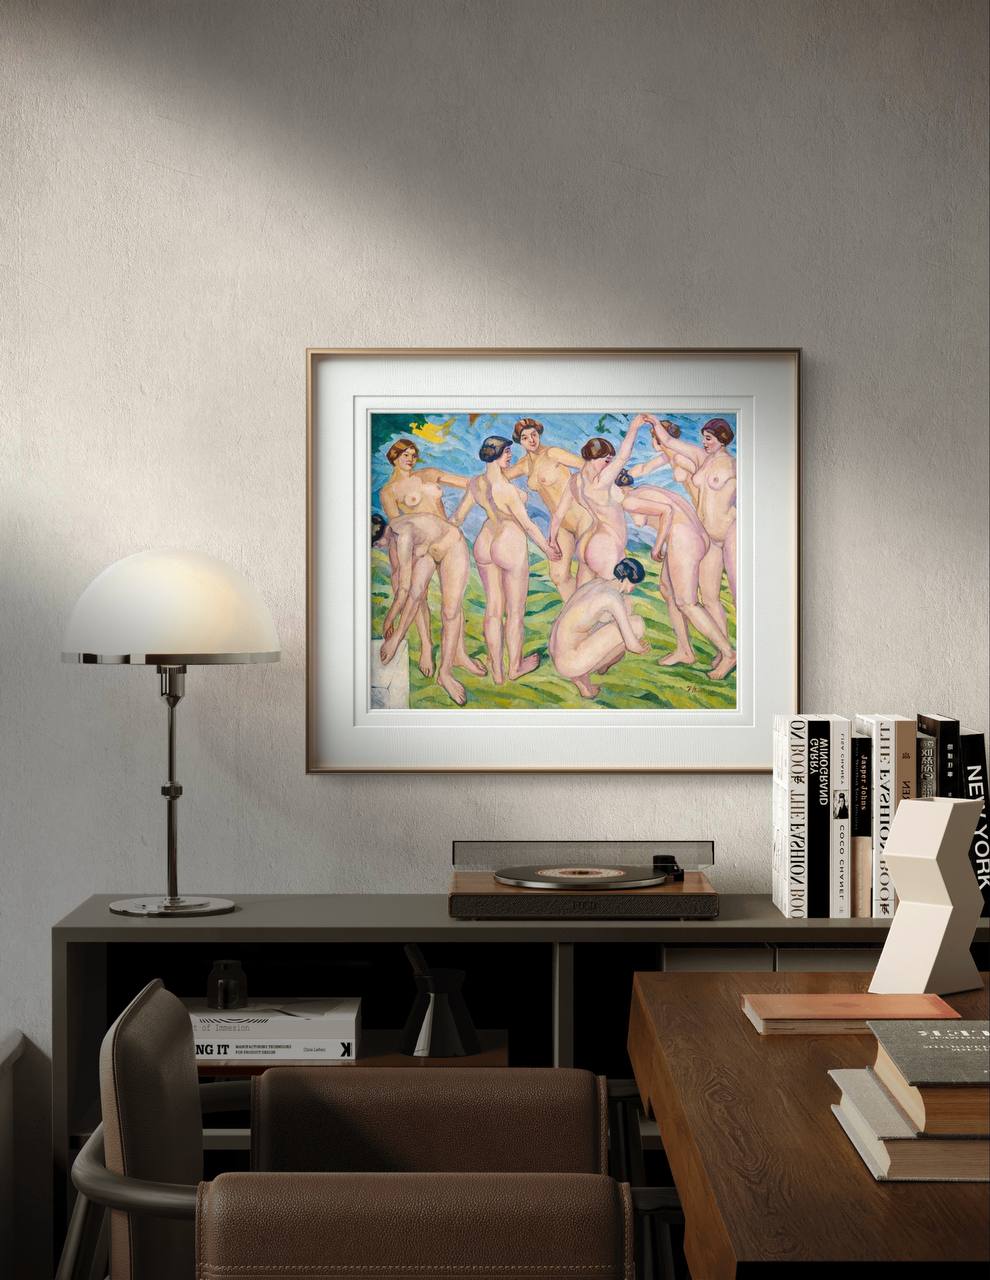 This lively painting features eight nude women engaging in a joyous dance on a green field. The women are connected in a circular formation, with a backdrop of a serene blue sky and abstract yellow birds. he poster is displayed in a modern room, above a dark wood sideboard adorned with books and a small lamp.